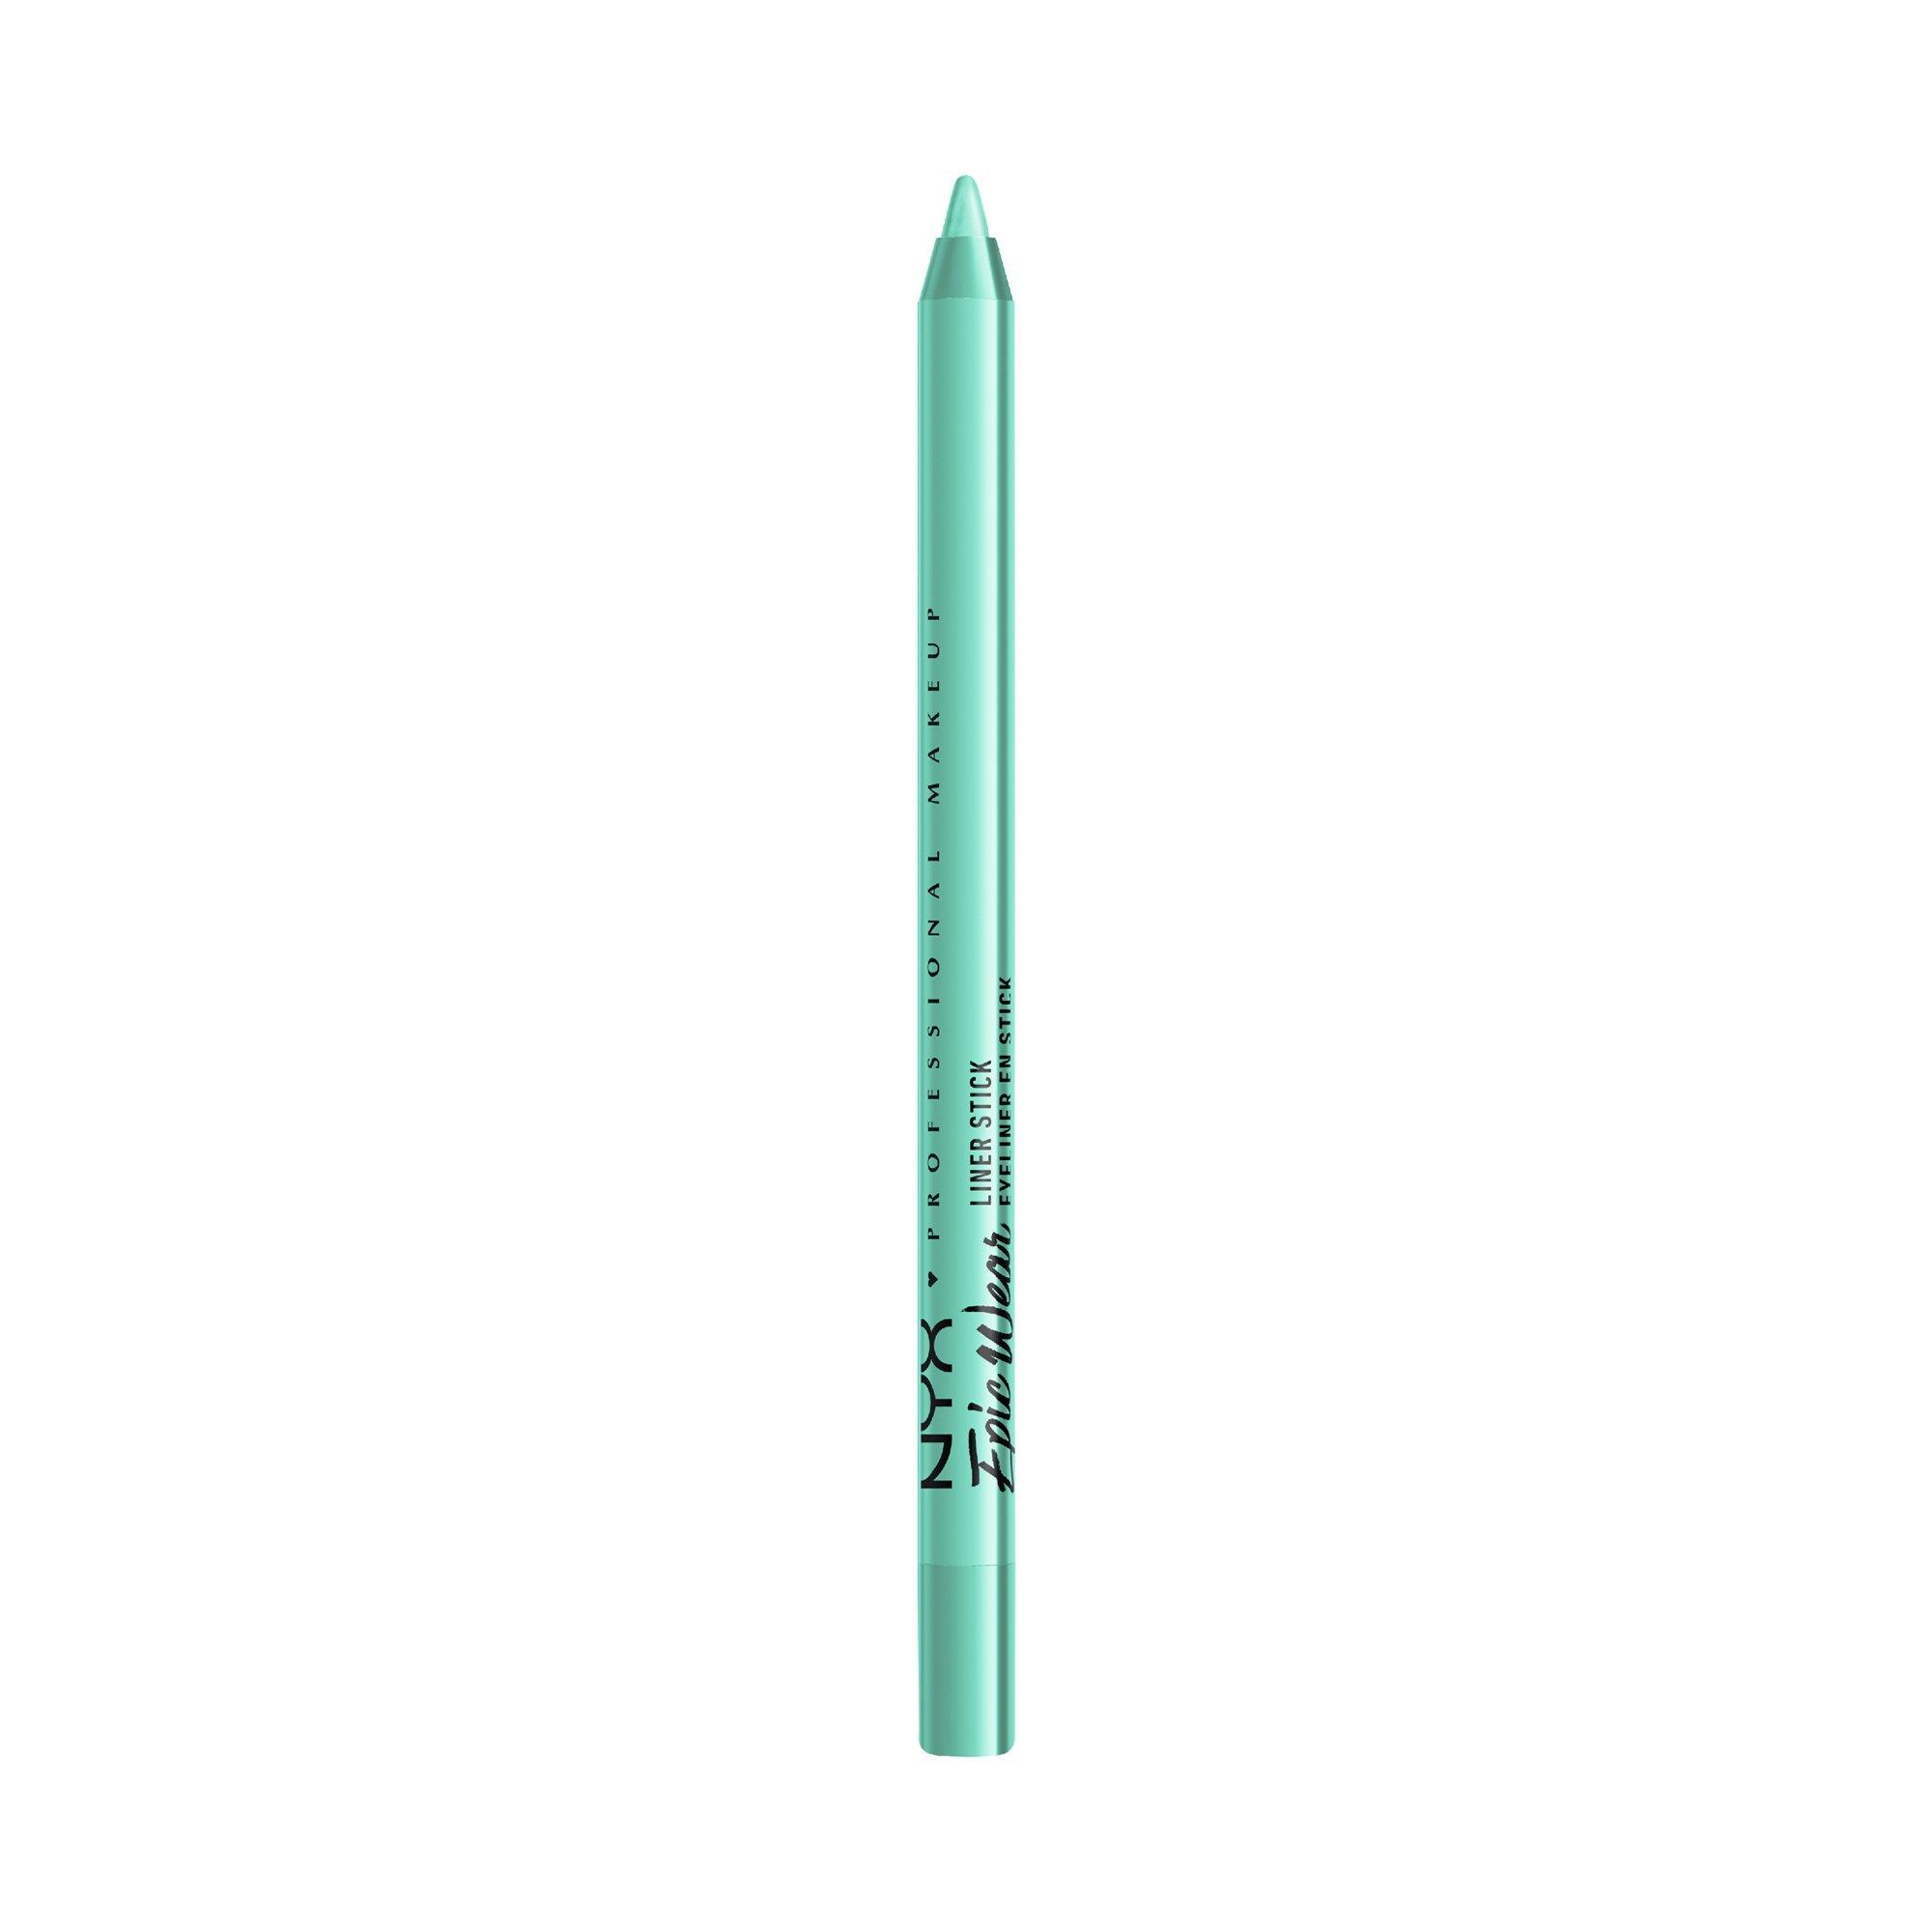 Image of NYX-PROFESSIONAL-MAKEUP Epic Wear Liner Stick Epic Wear Liner Stick, Eyeliner